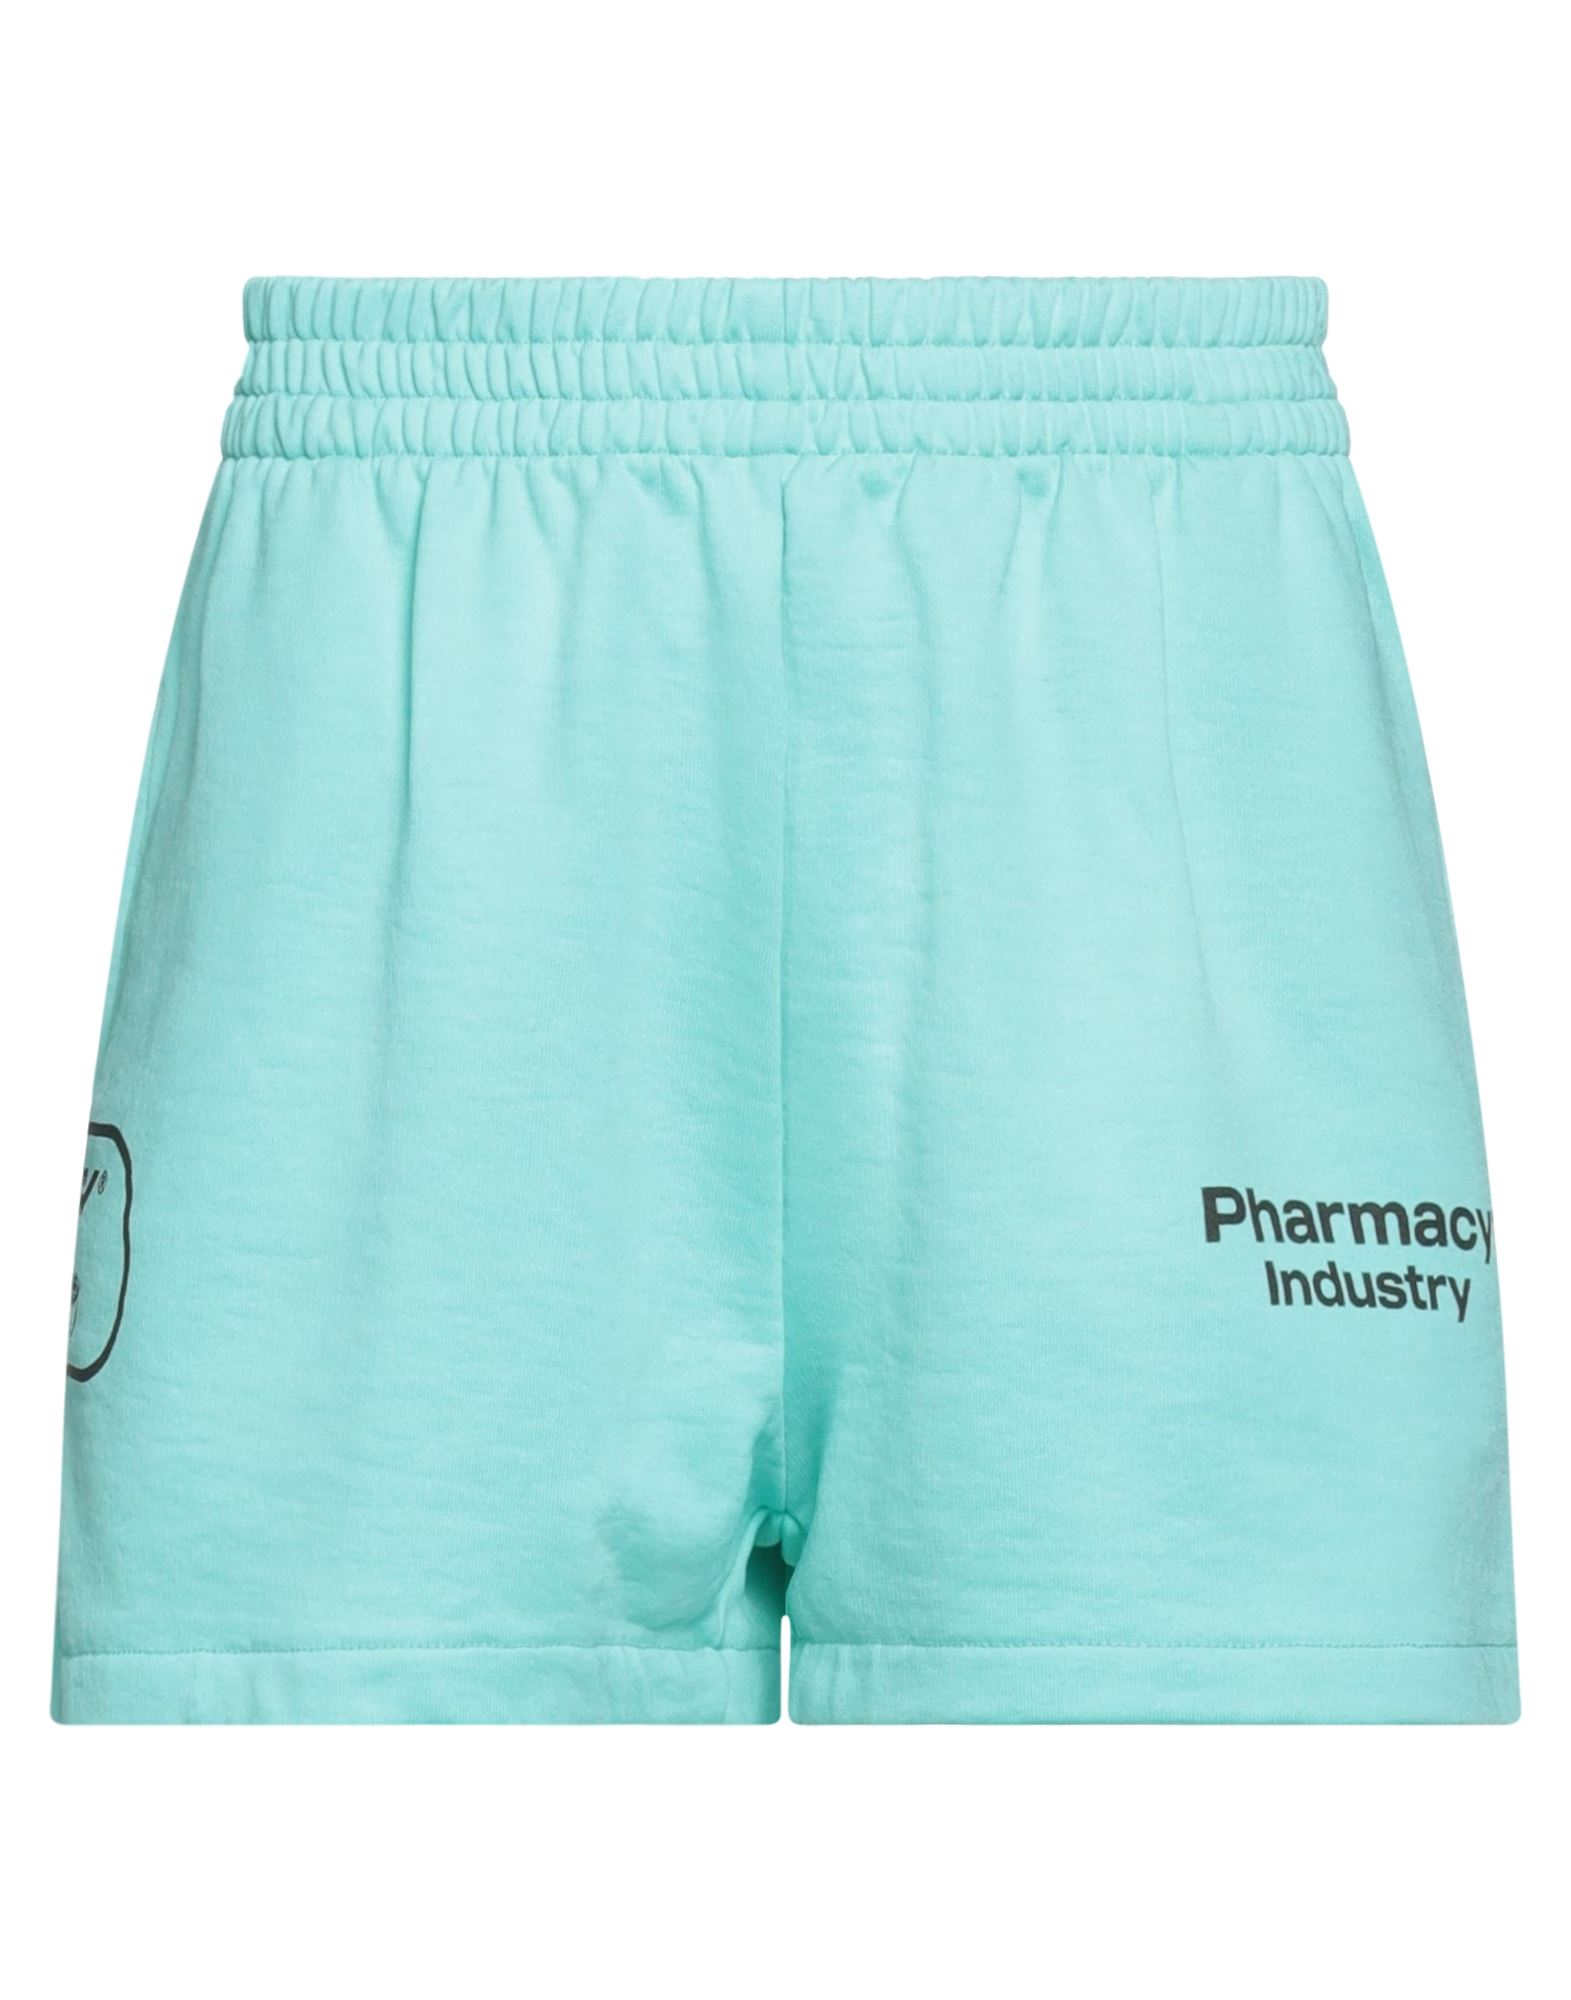 Pharmacy Industry Green Cotton Short In Blue